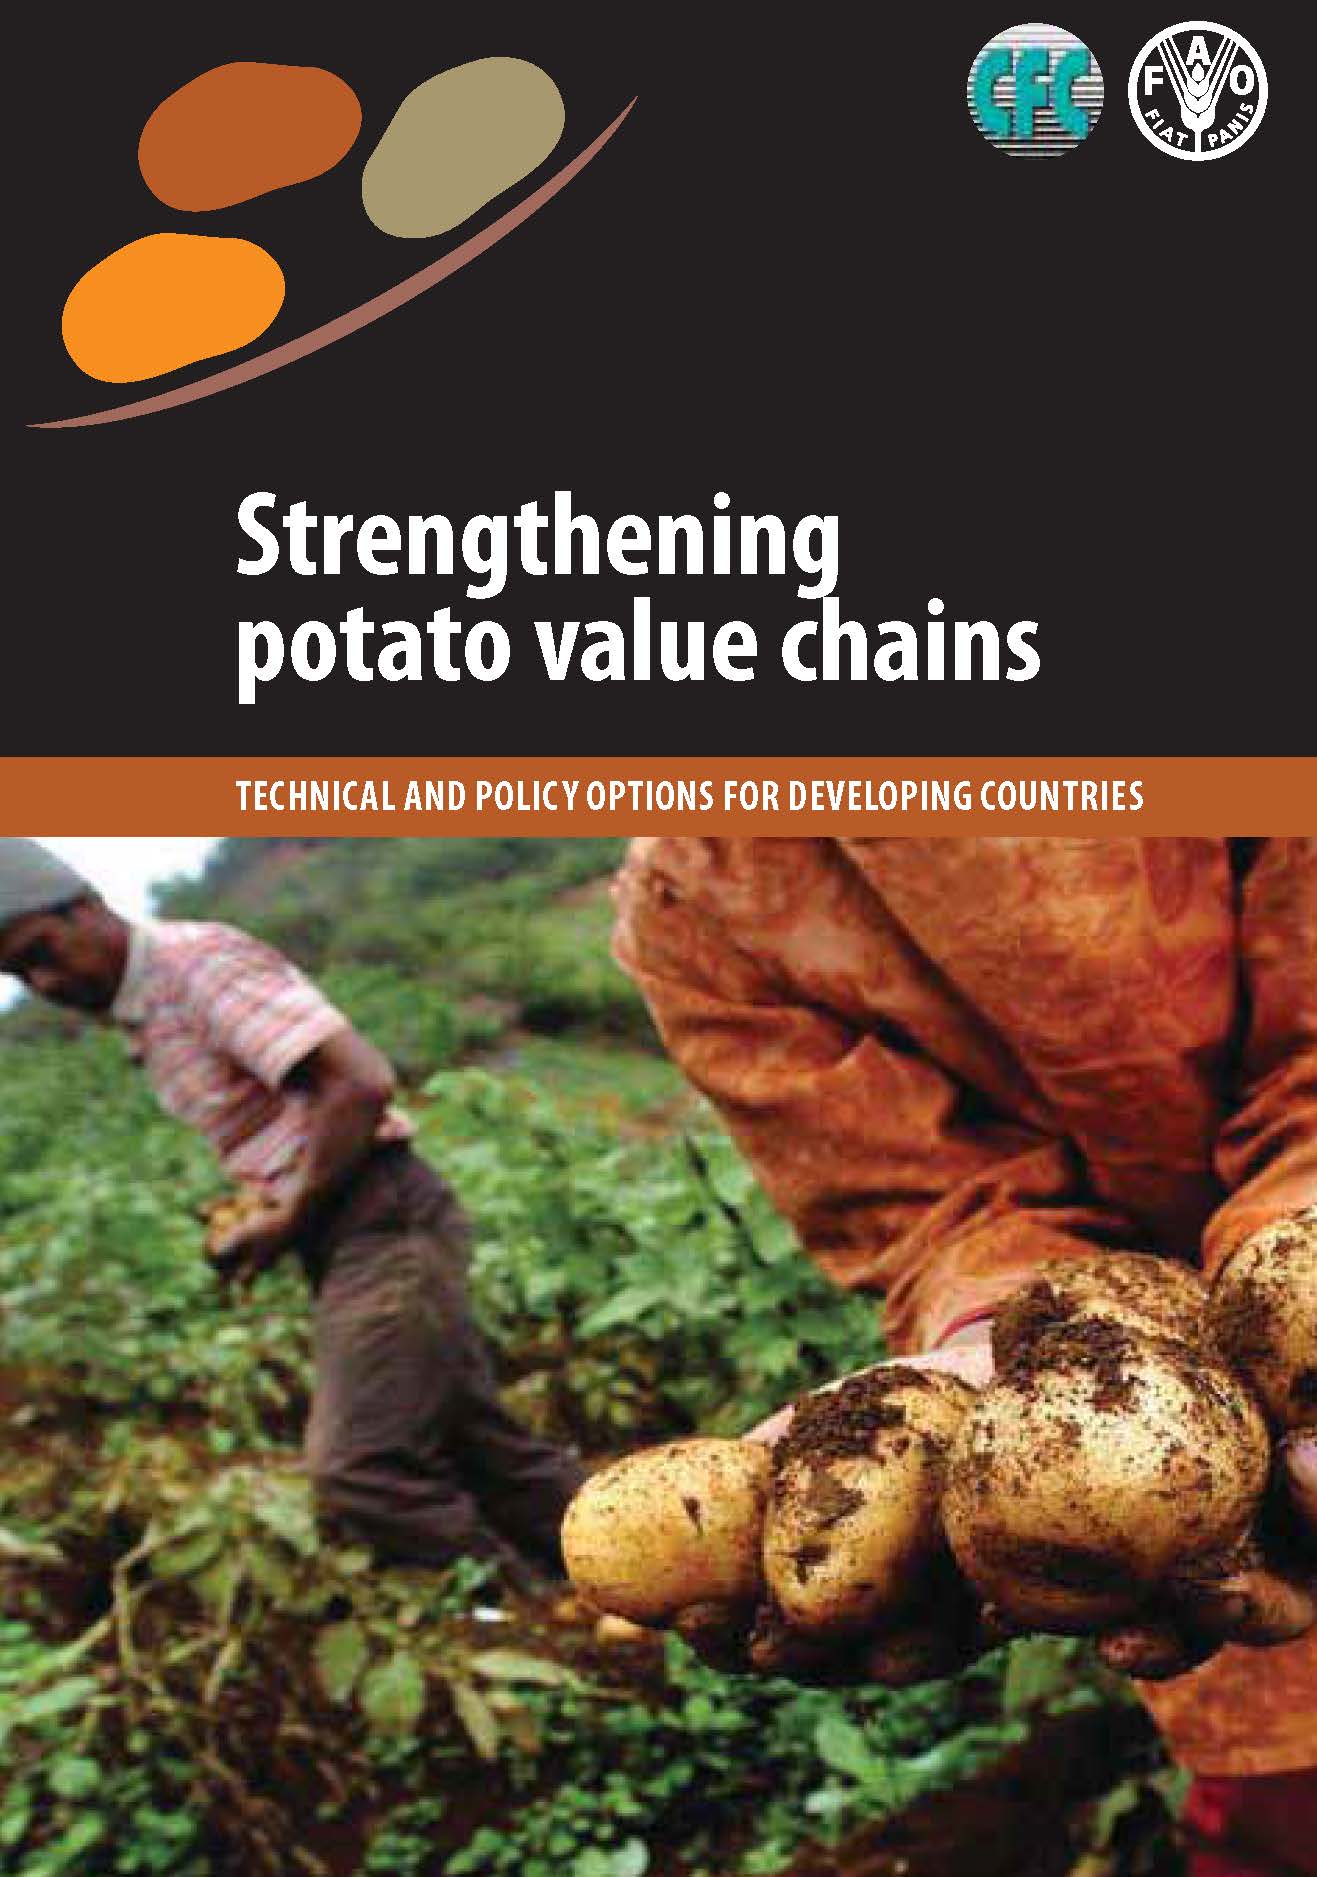 Strengthening potato value chains: Technical and policy options for developing countries.